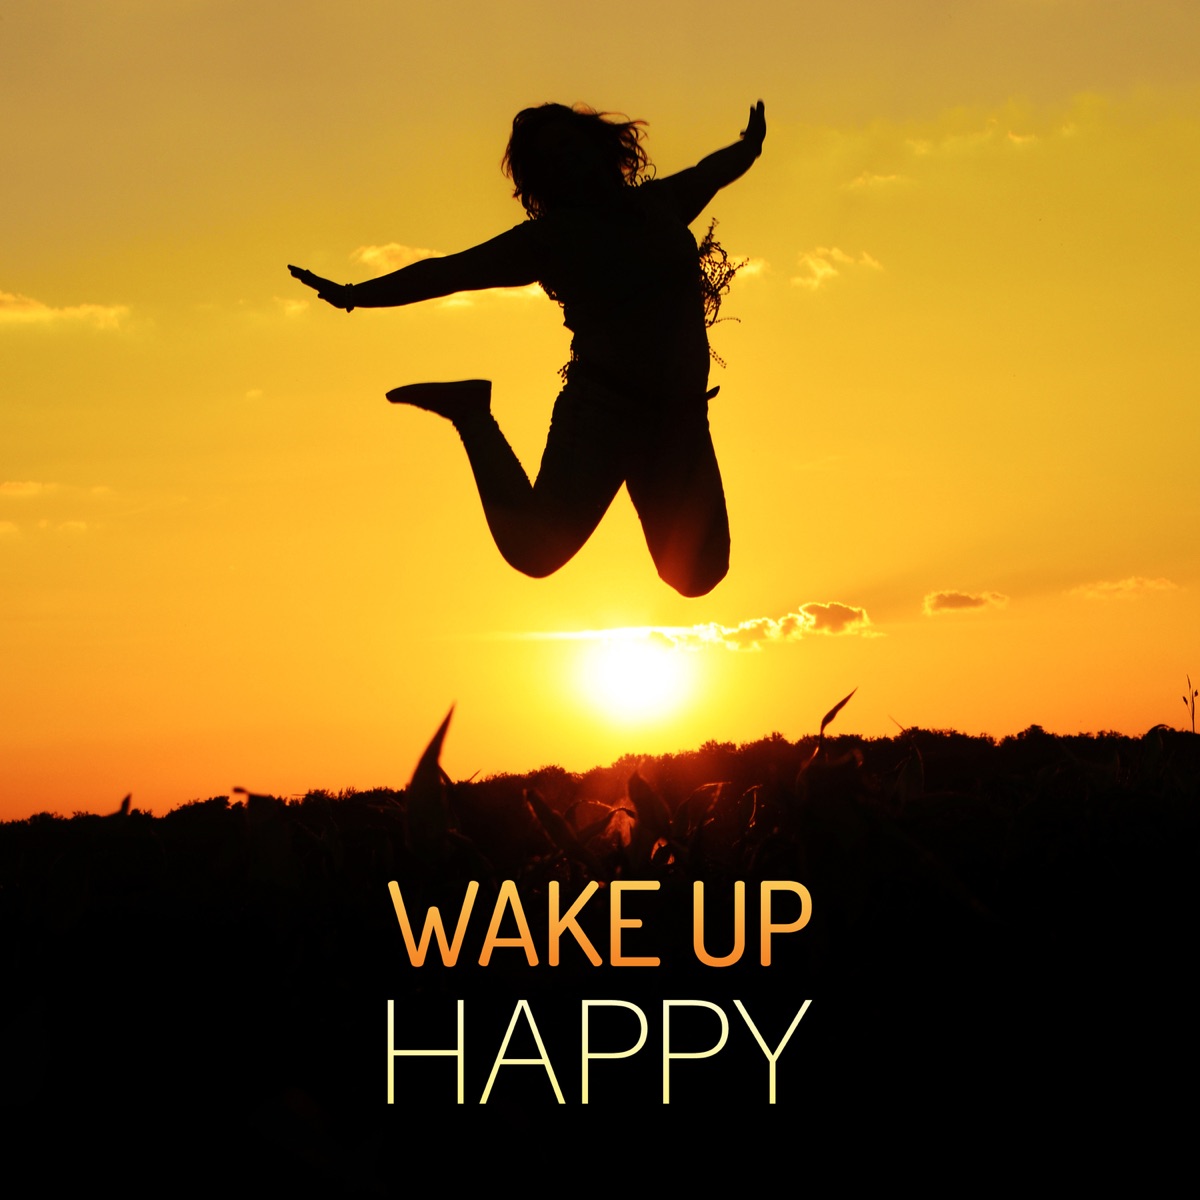 Wake Up Happy: Instrumental Music and Nature Sounds for Good Morning, Relax  Your Mind, Stress Management, Deep Meditation, Yoga Poses by Natural Sounds  Music Academy on Apple Music